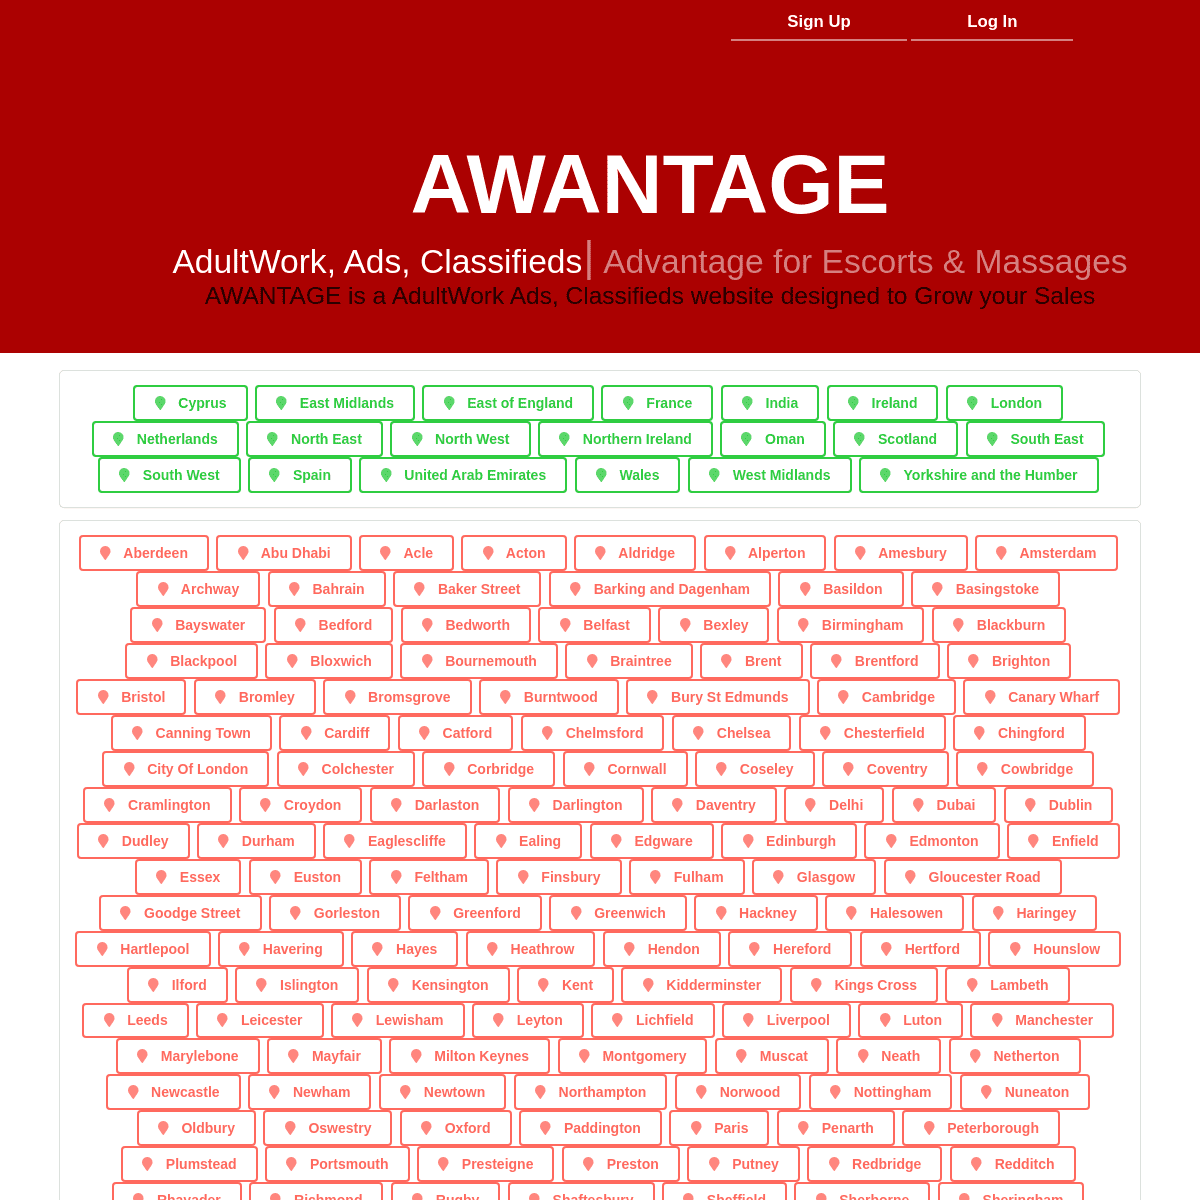 A complete backup of https://awantage.com